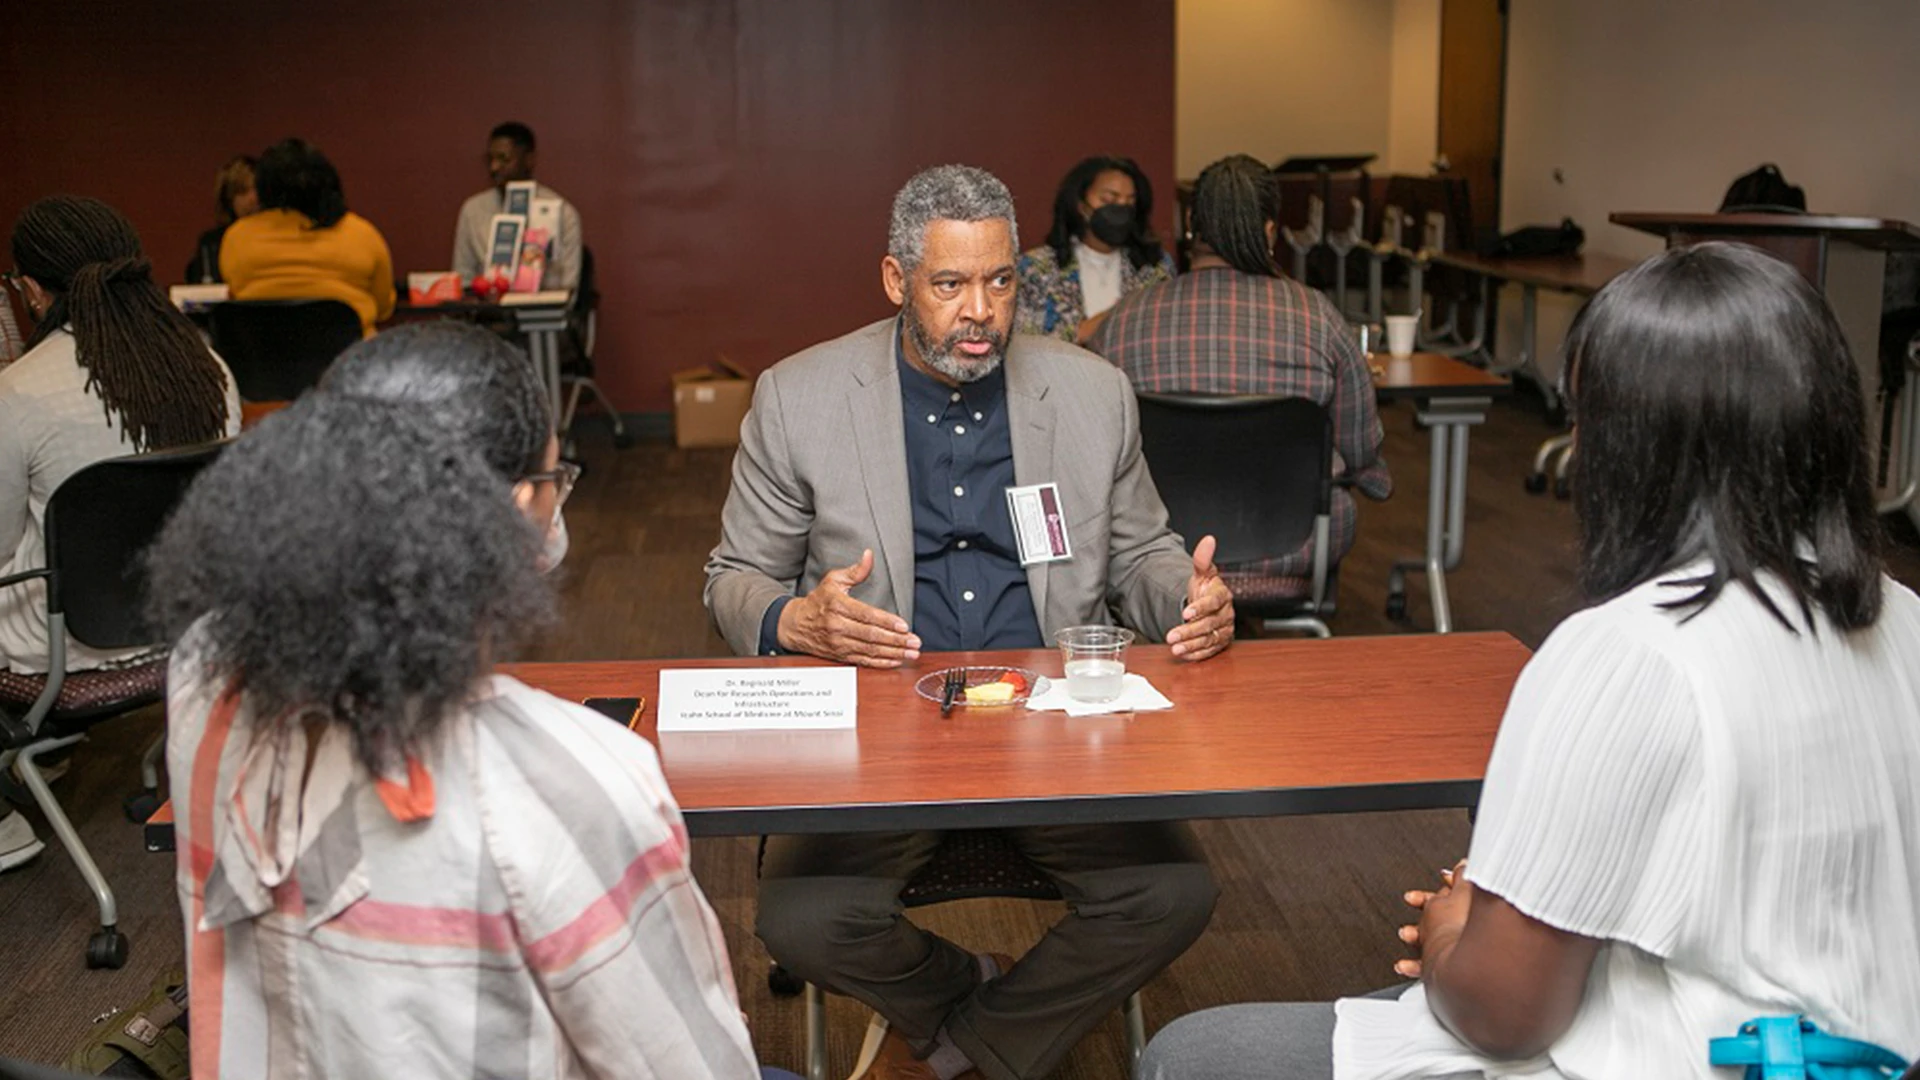 Mount Sinai’s Reginald W. Miller, DVM, DACLAM, interacts with students on the campus of Meharry Medical College.